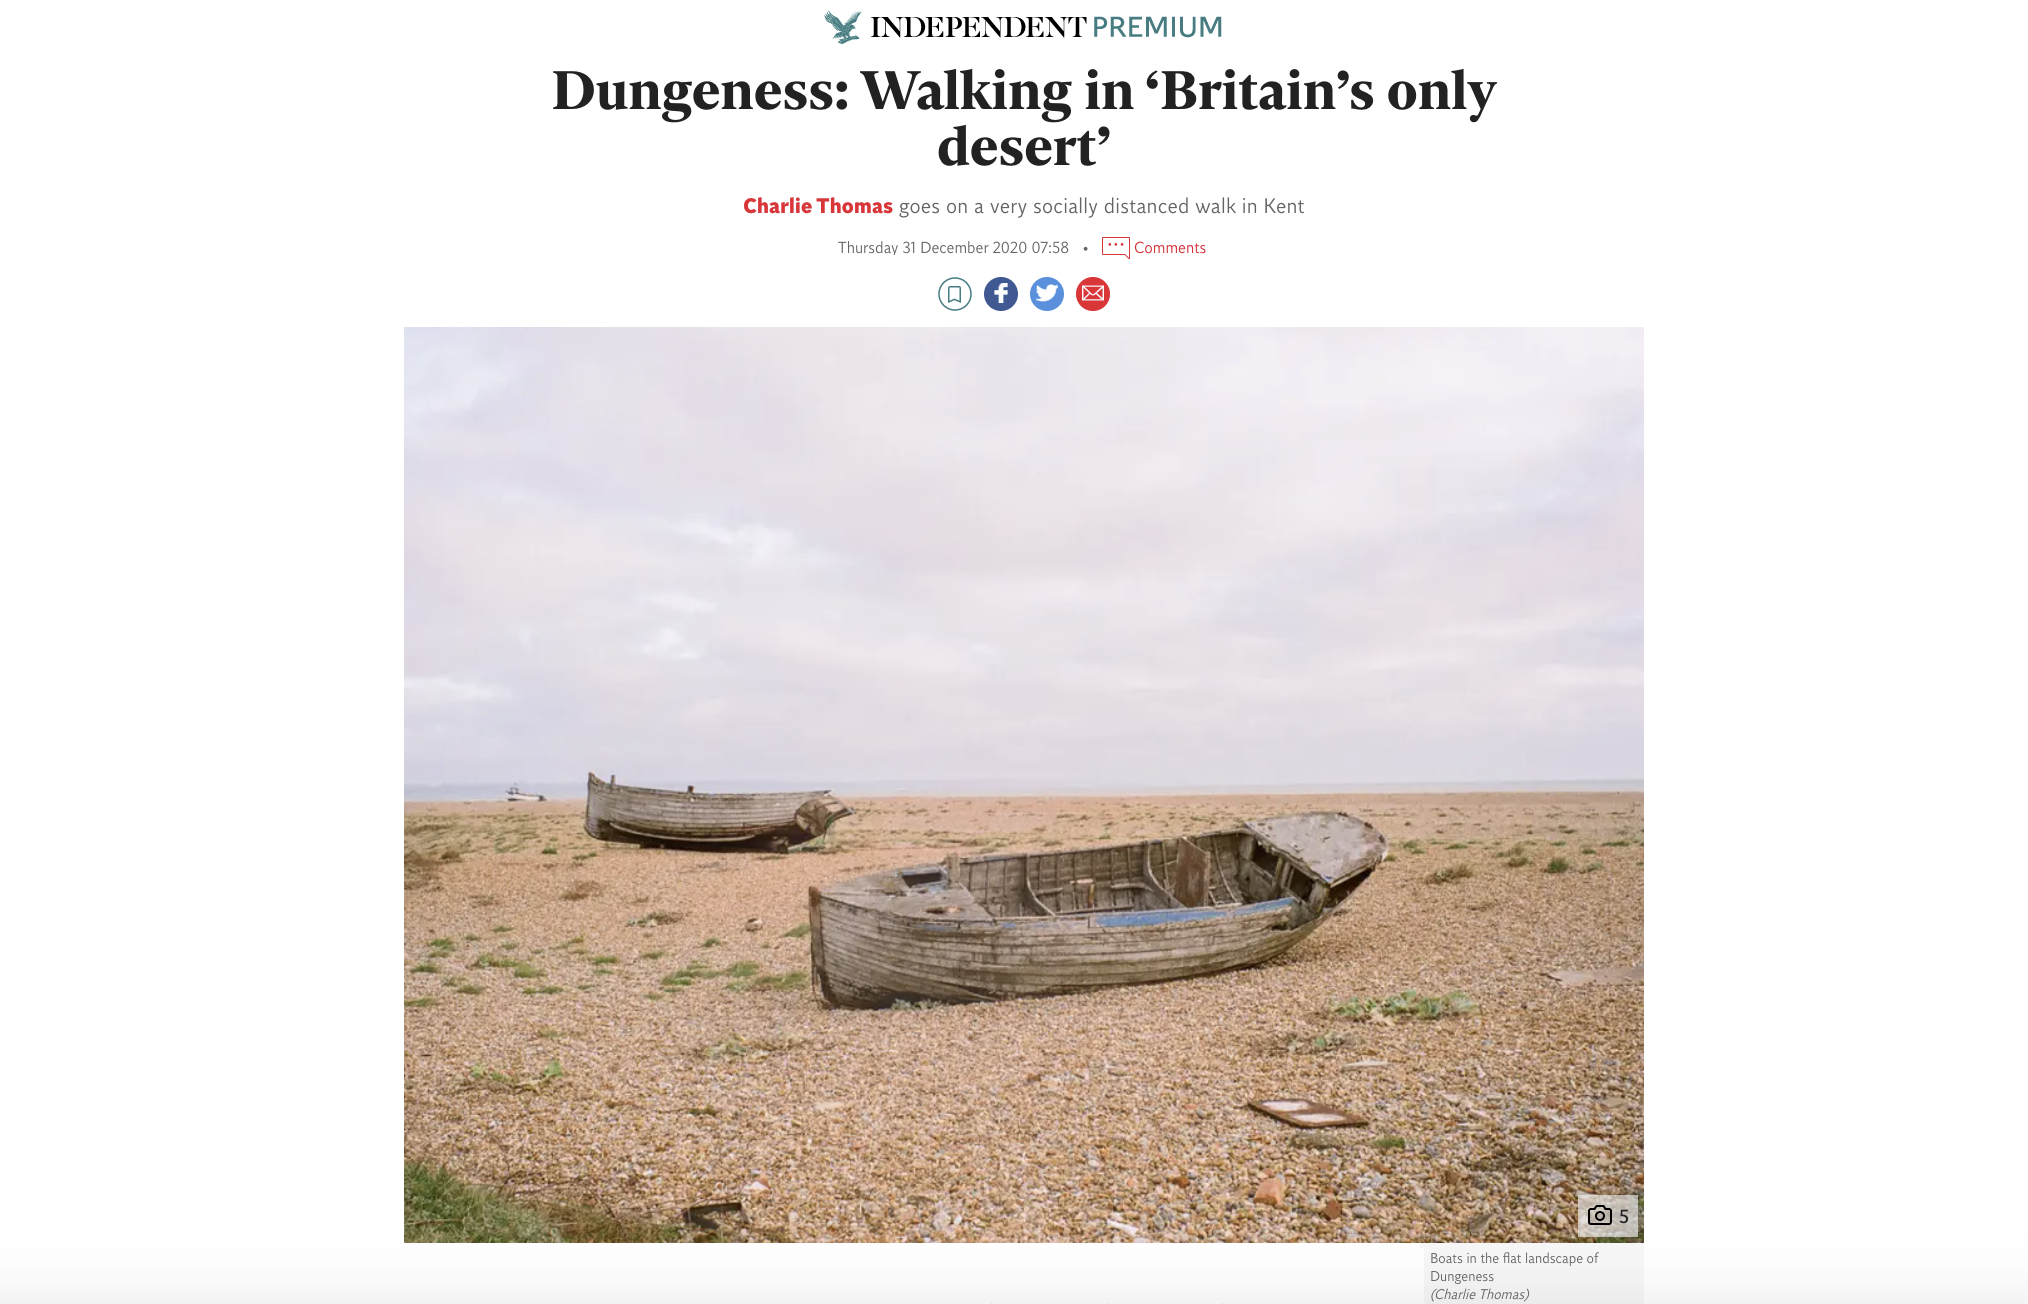 The Independent - Walking in Dungeness